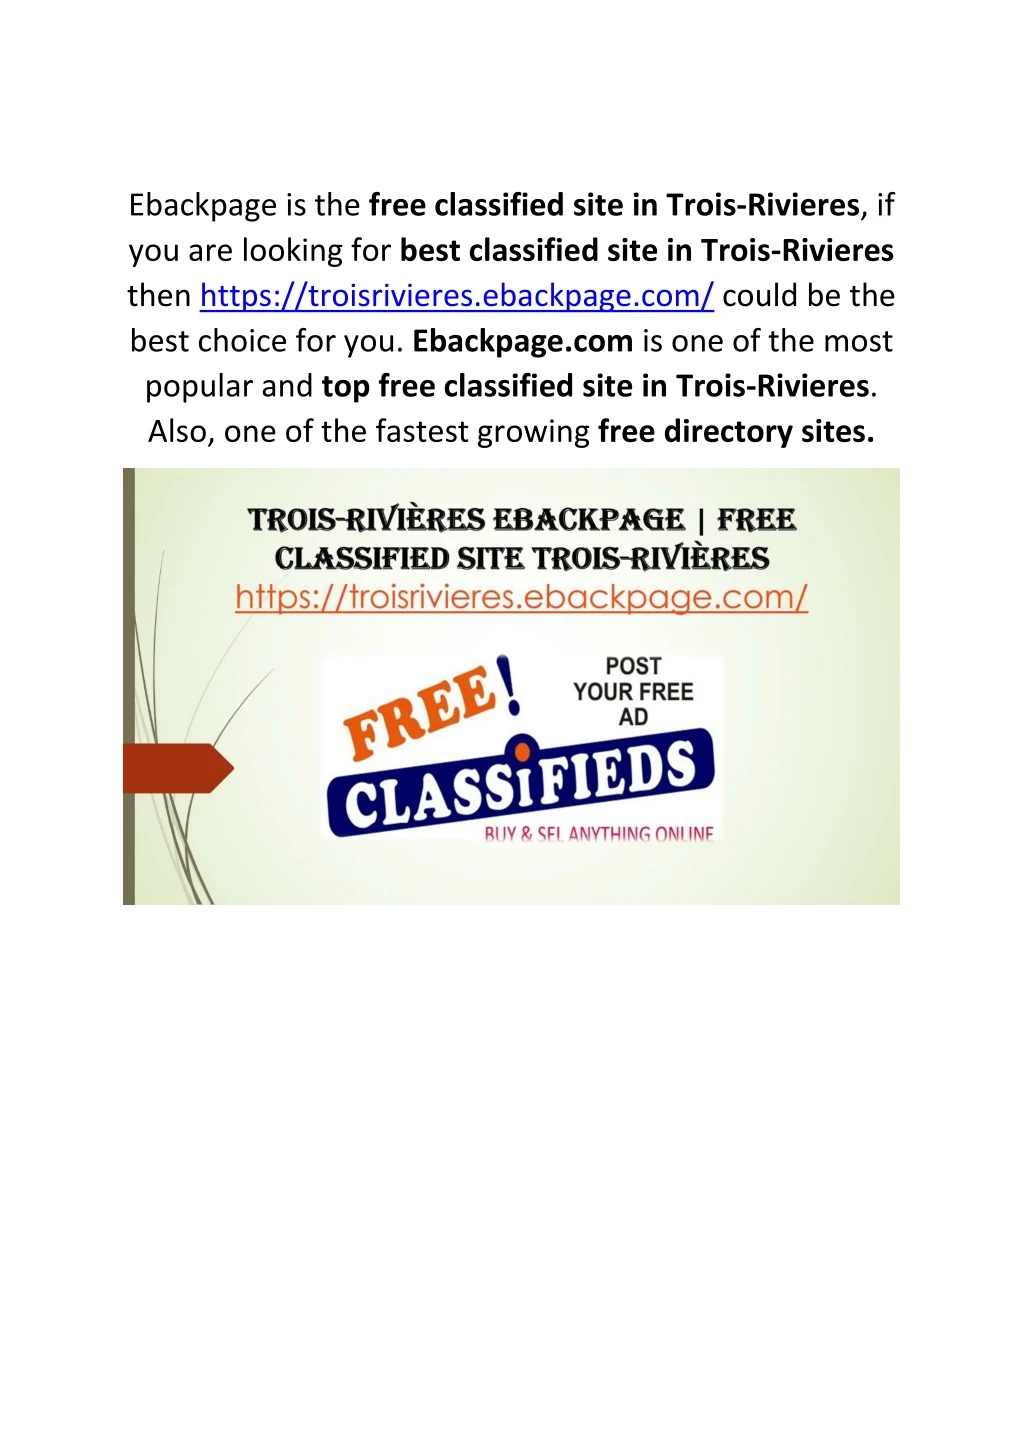 ebackpage is the free classified site in trois